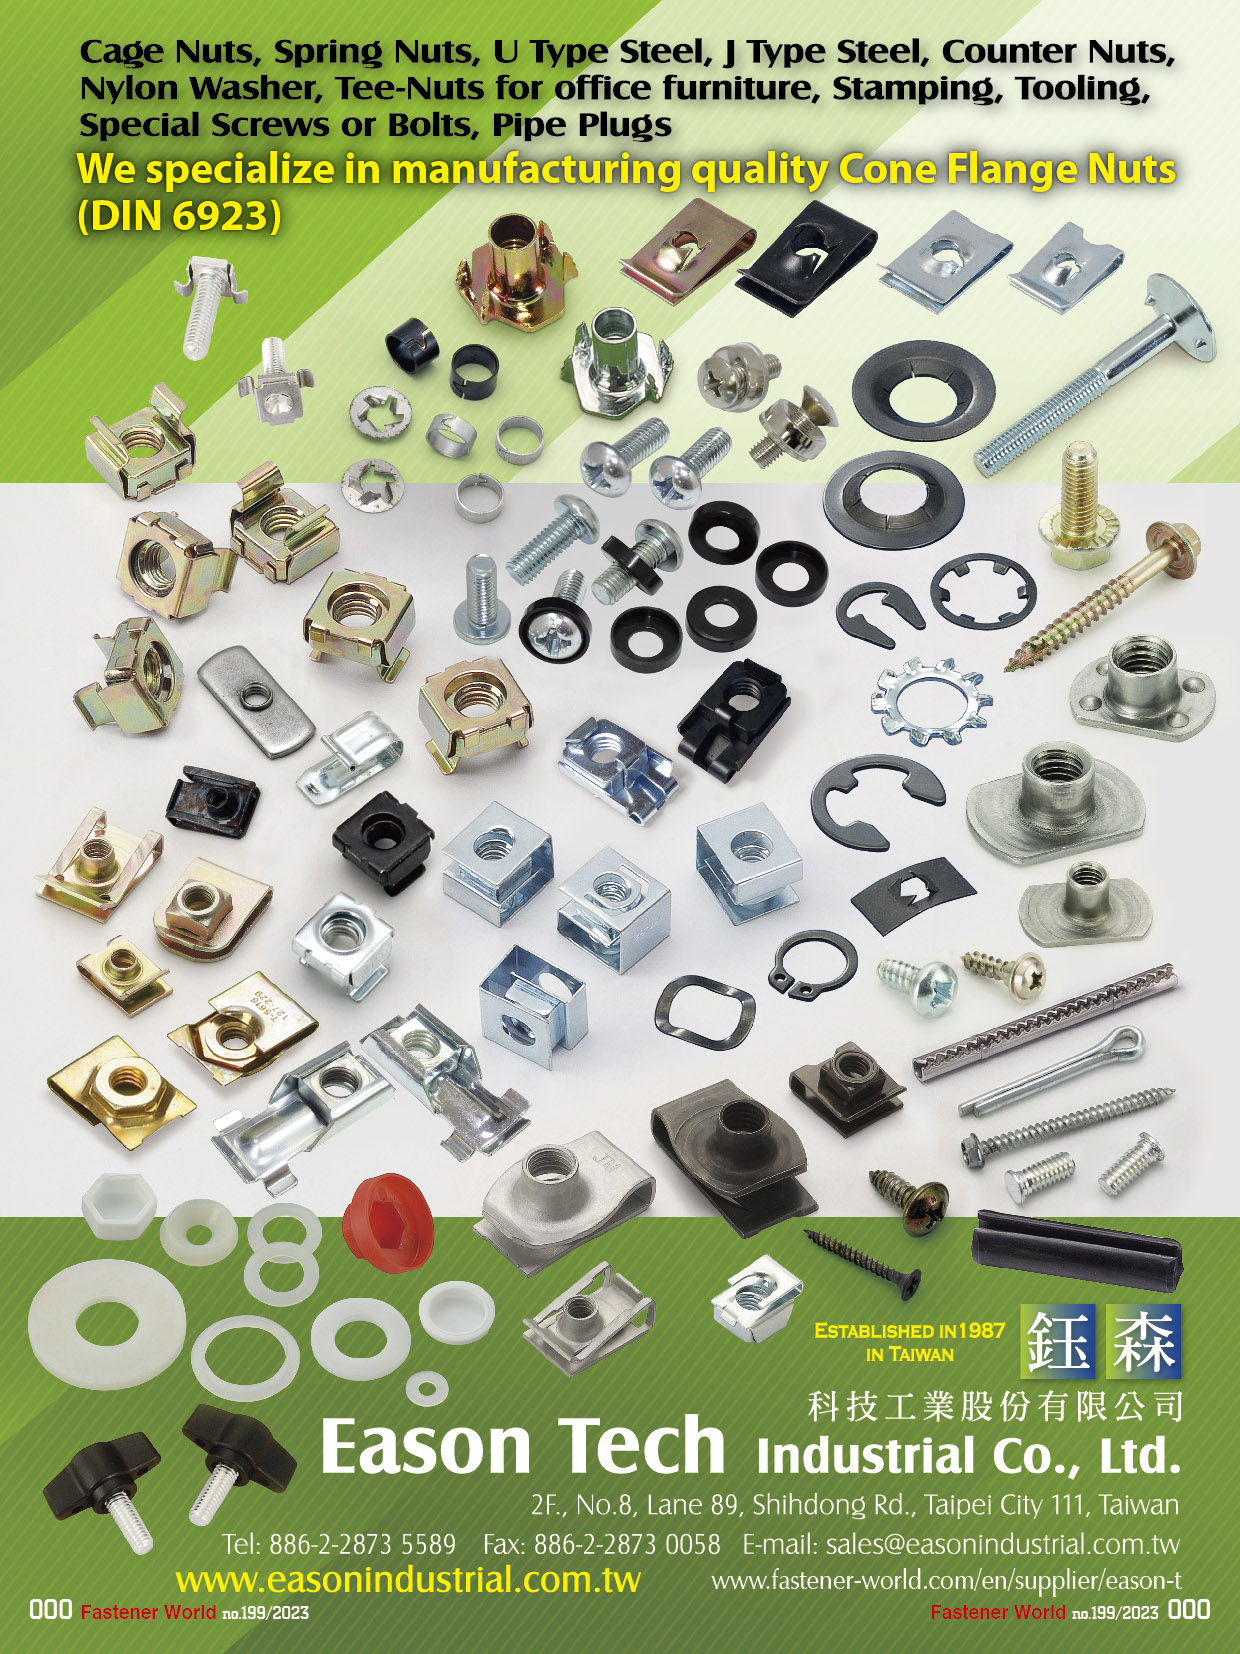 EASON TECH INDUSTRIAL CO., LTD.  , Cage Nuts, Spring Nuts, U Type Steel, J Type Steel, Counter Nut, Nylon Washer, Tee-Nuts for office furniture, Stamping, Tooling, Special Screws or Bolts, Pipe Plug , Cage Nuts